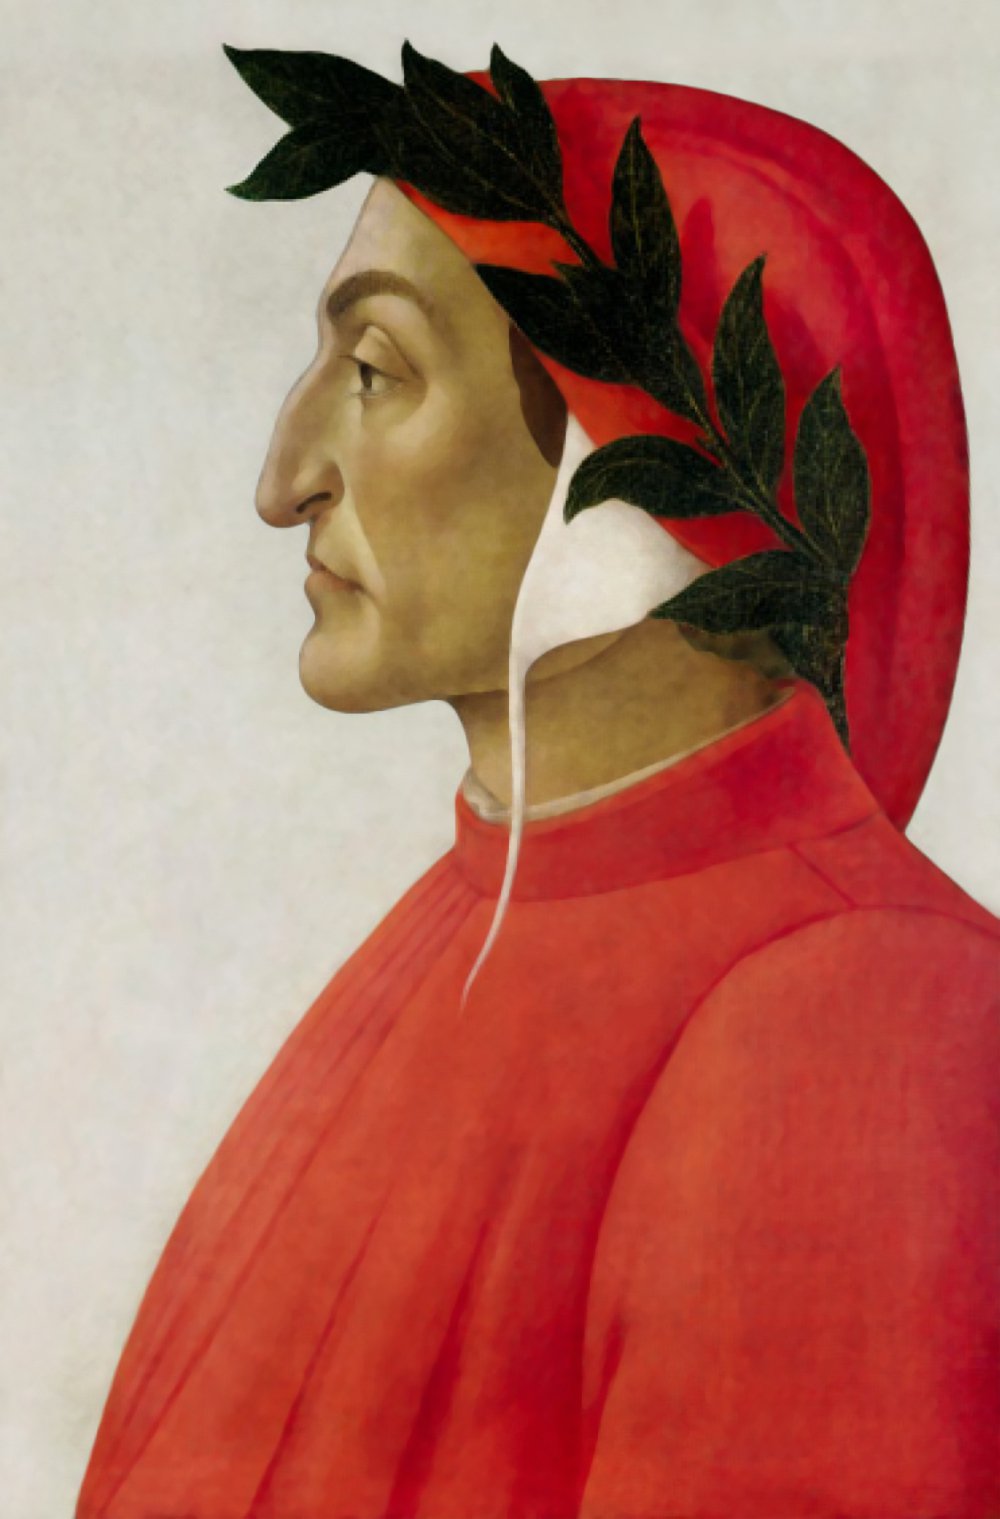 dante's face - the man who personified hell - has been revealed after 700 years